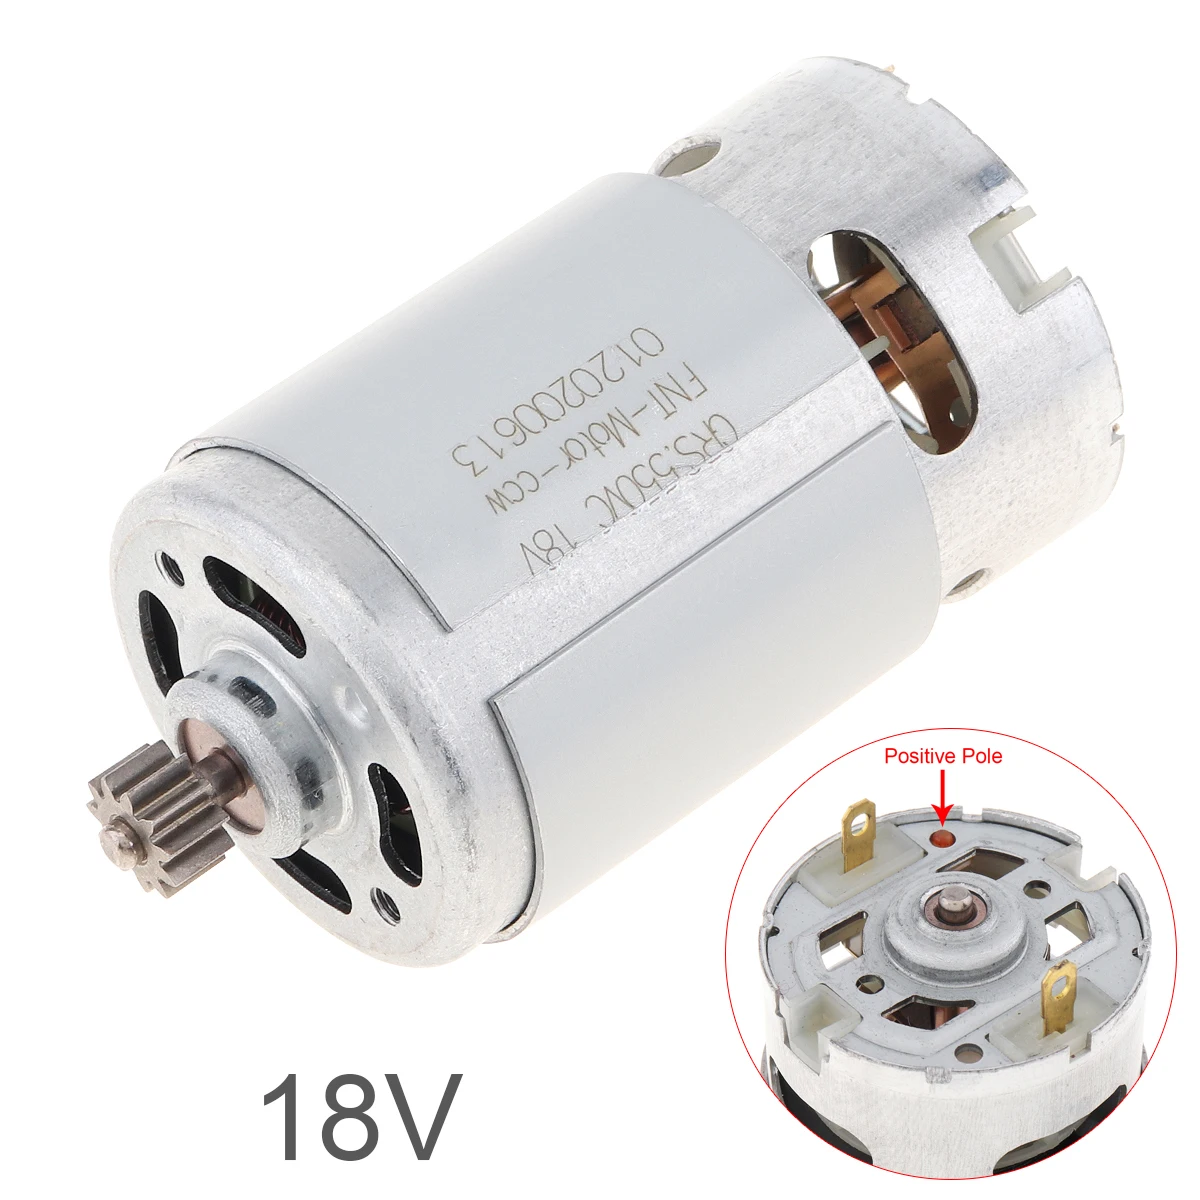 RS550 16.8V DC 26000 RPM Motor Ball Bearing Large Torque High Power Low Noise 